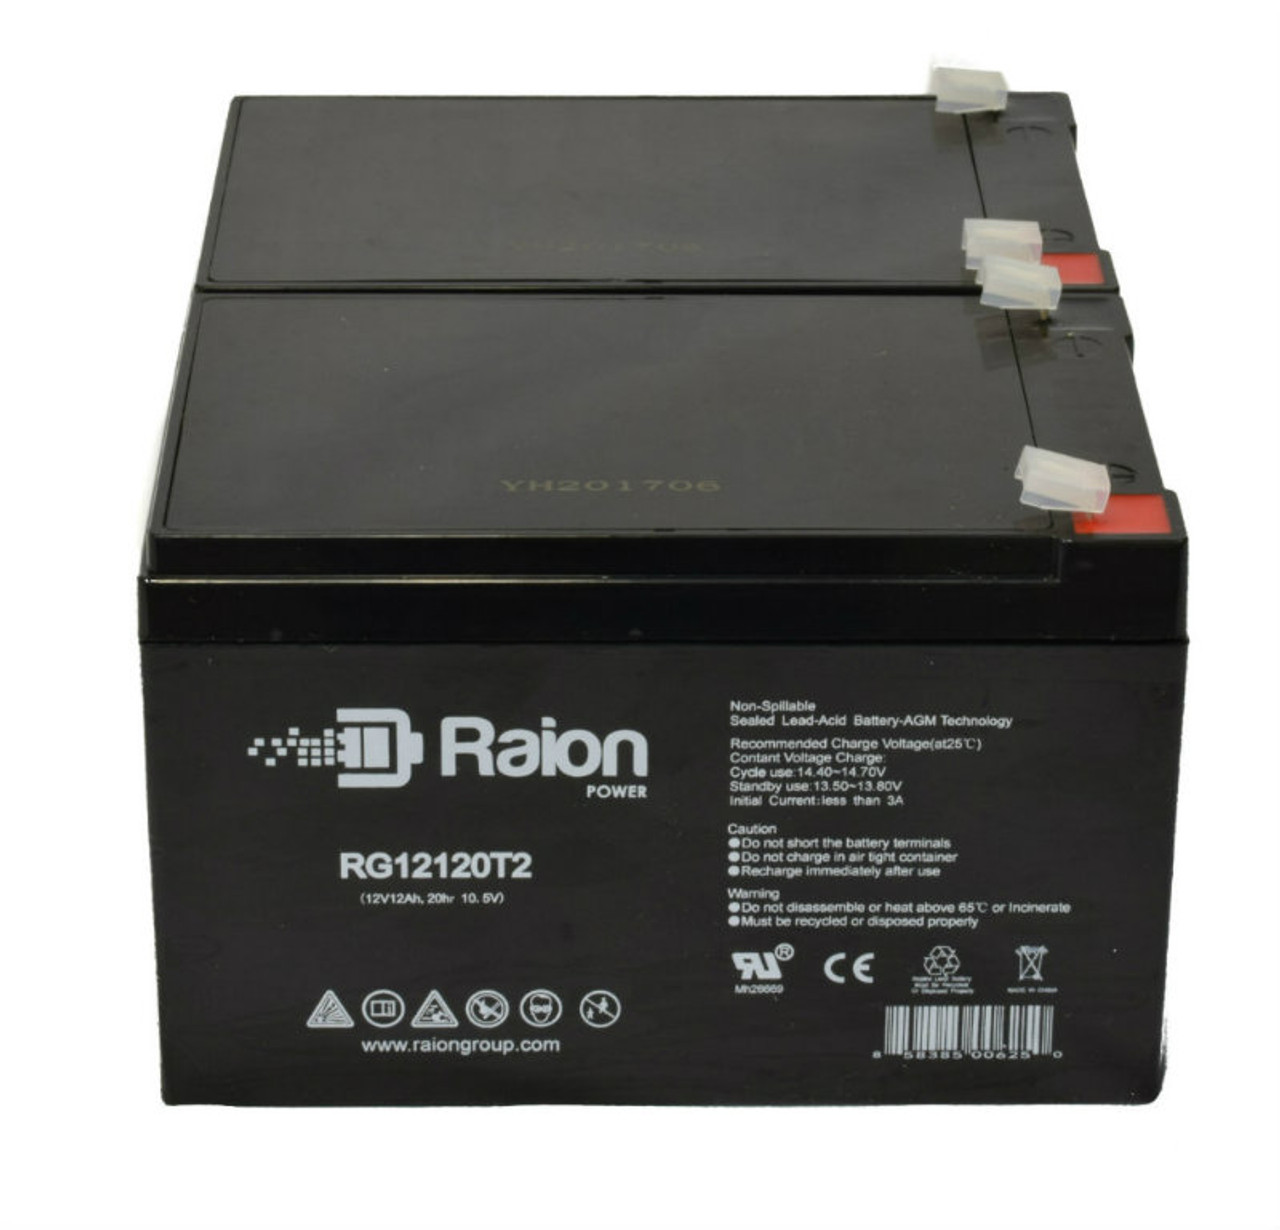 Raion Power 12V 12Ah Non-Spillable Compatible Replacement Battery for Europower EPL 12-12 - (2 Pack)